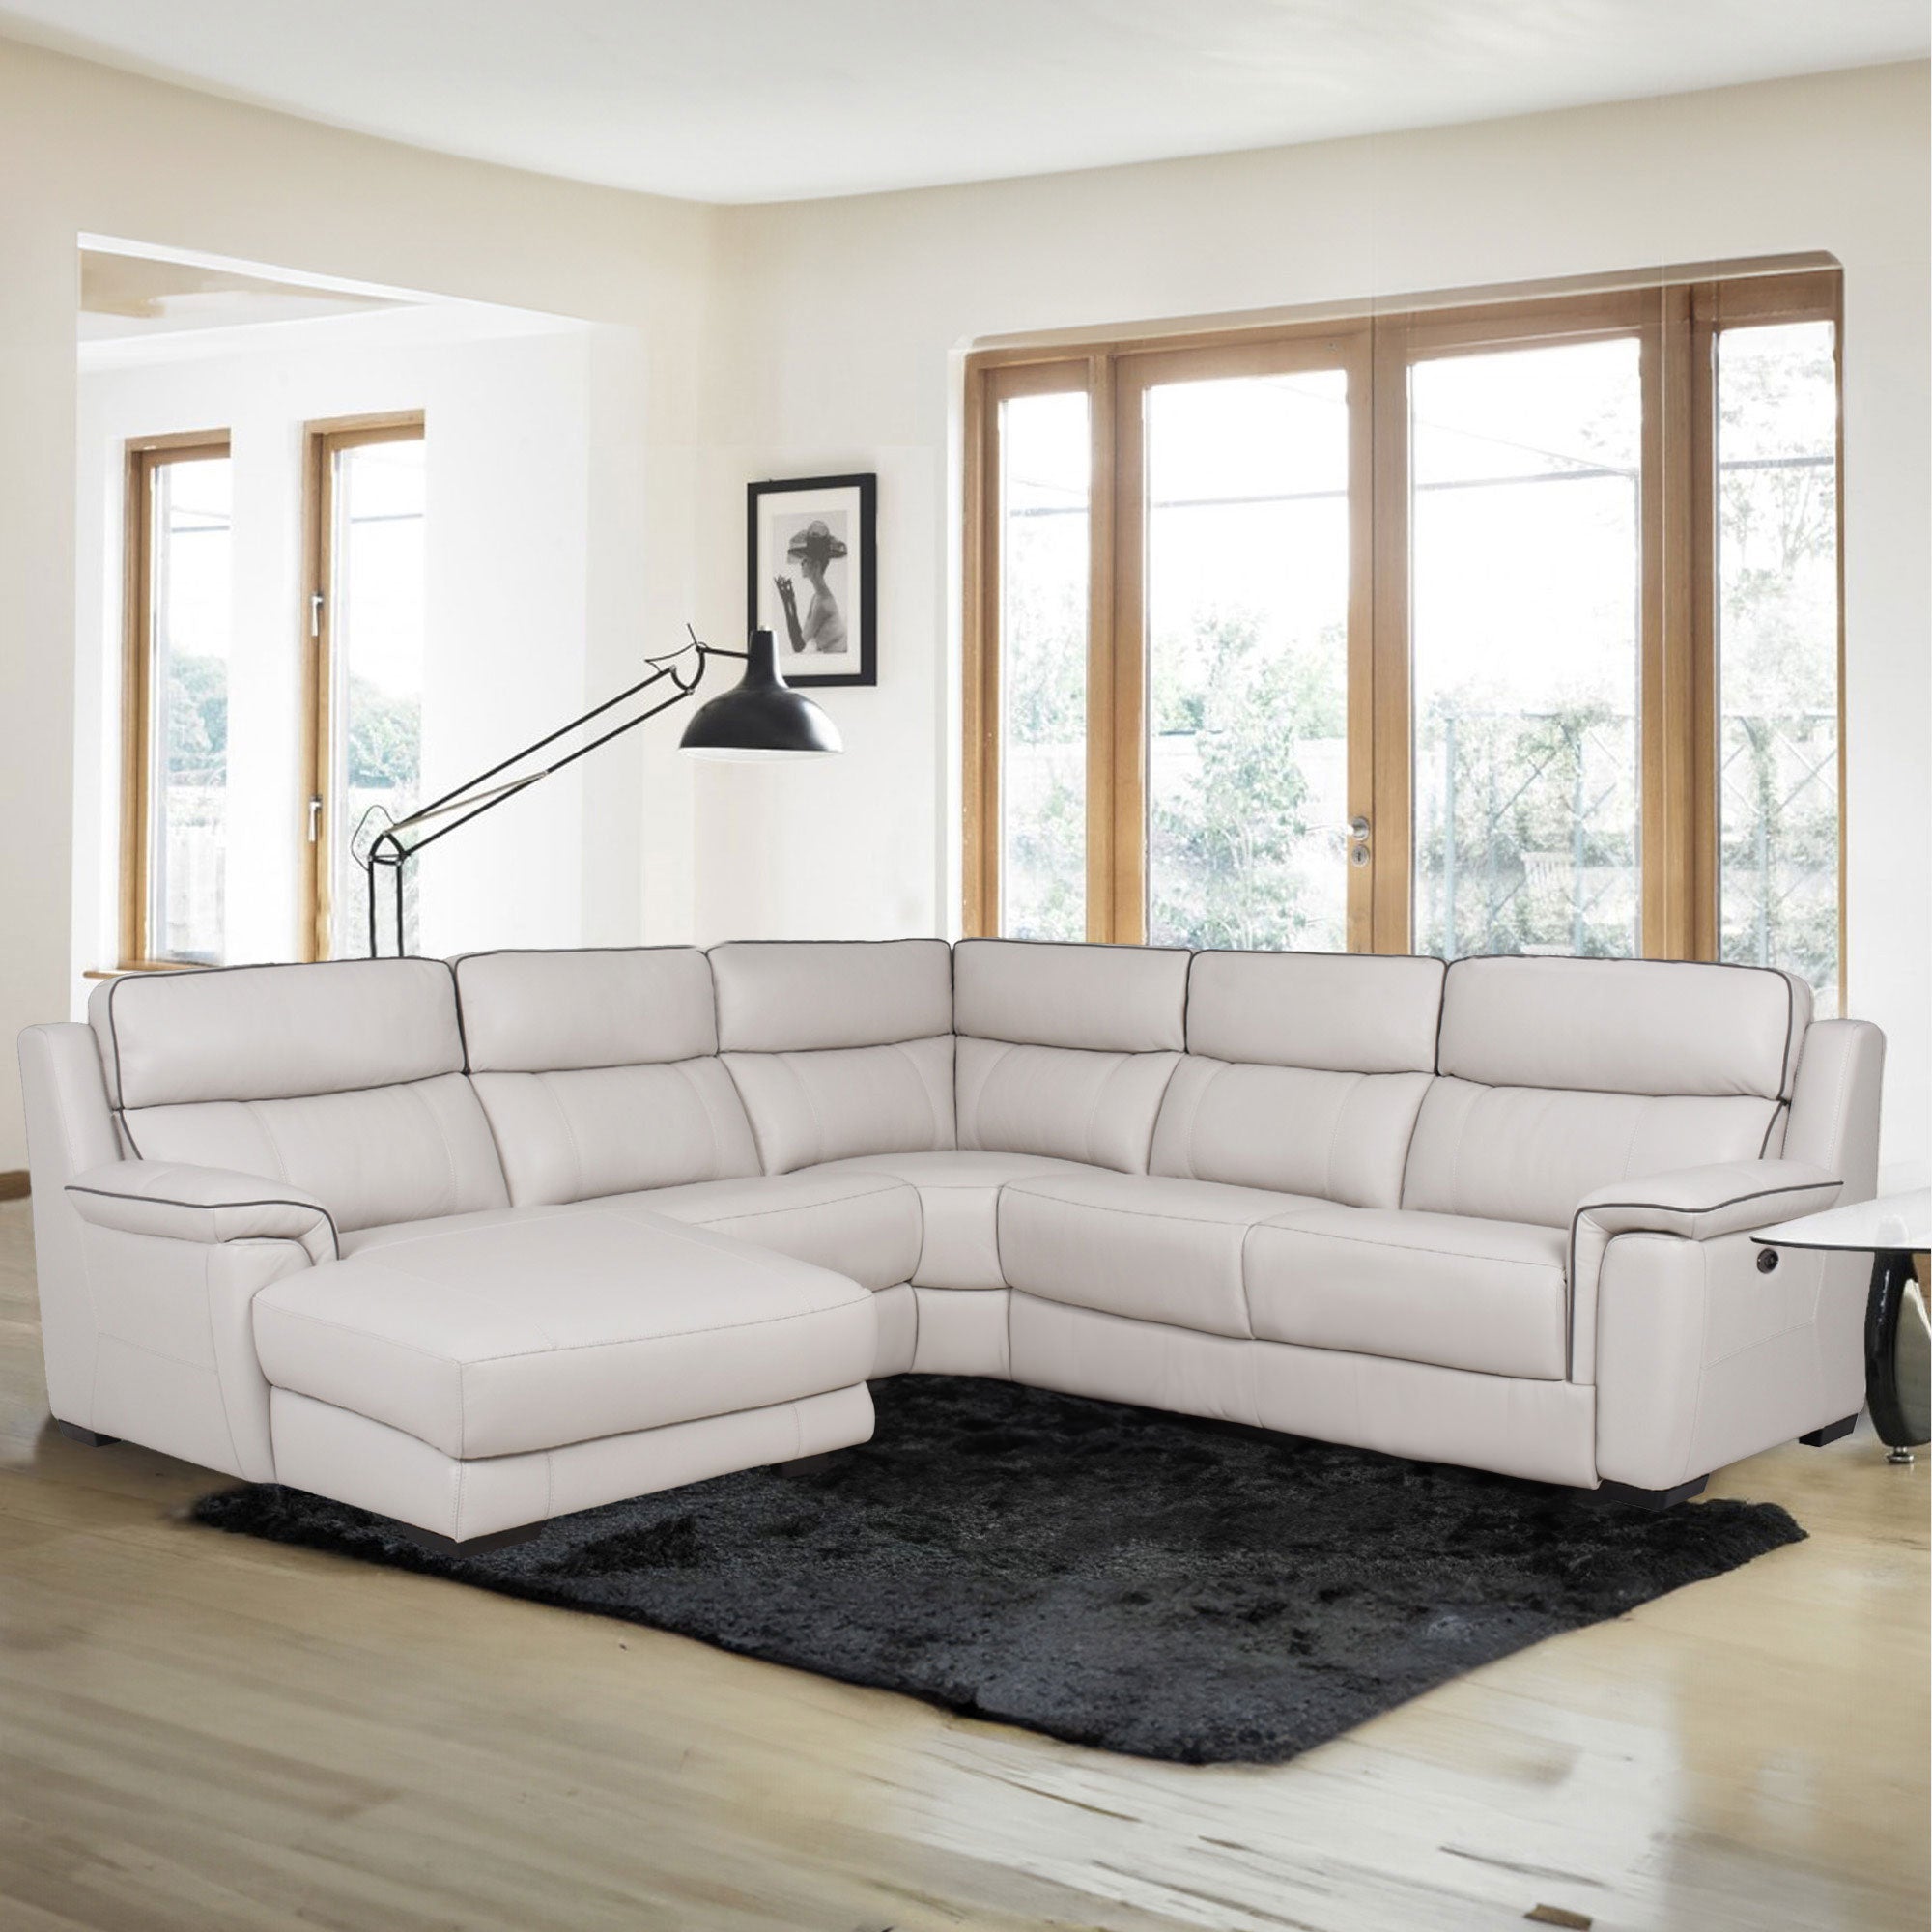 LHF Chaise Corner Group In Cat 25 Full Leather  In Cat 25 Full Leather